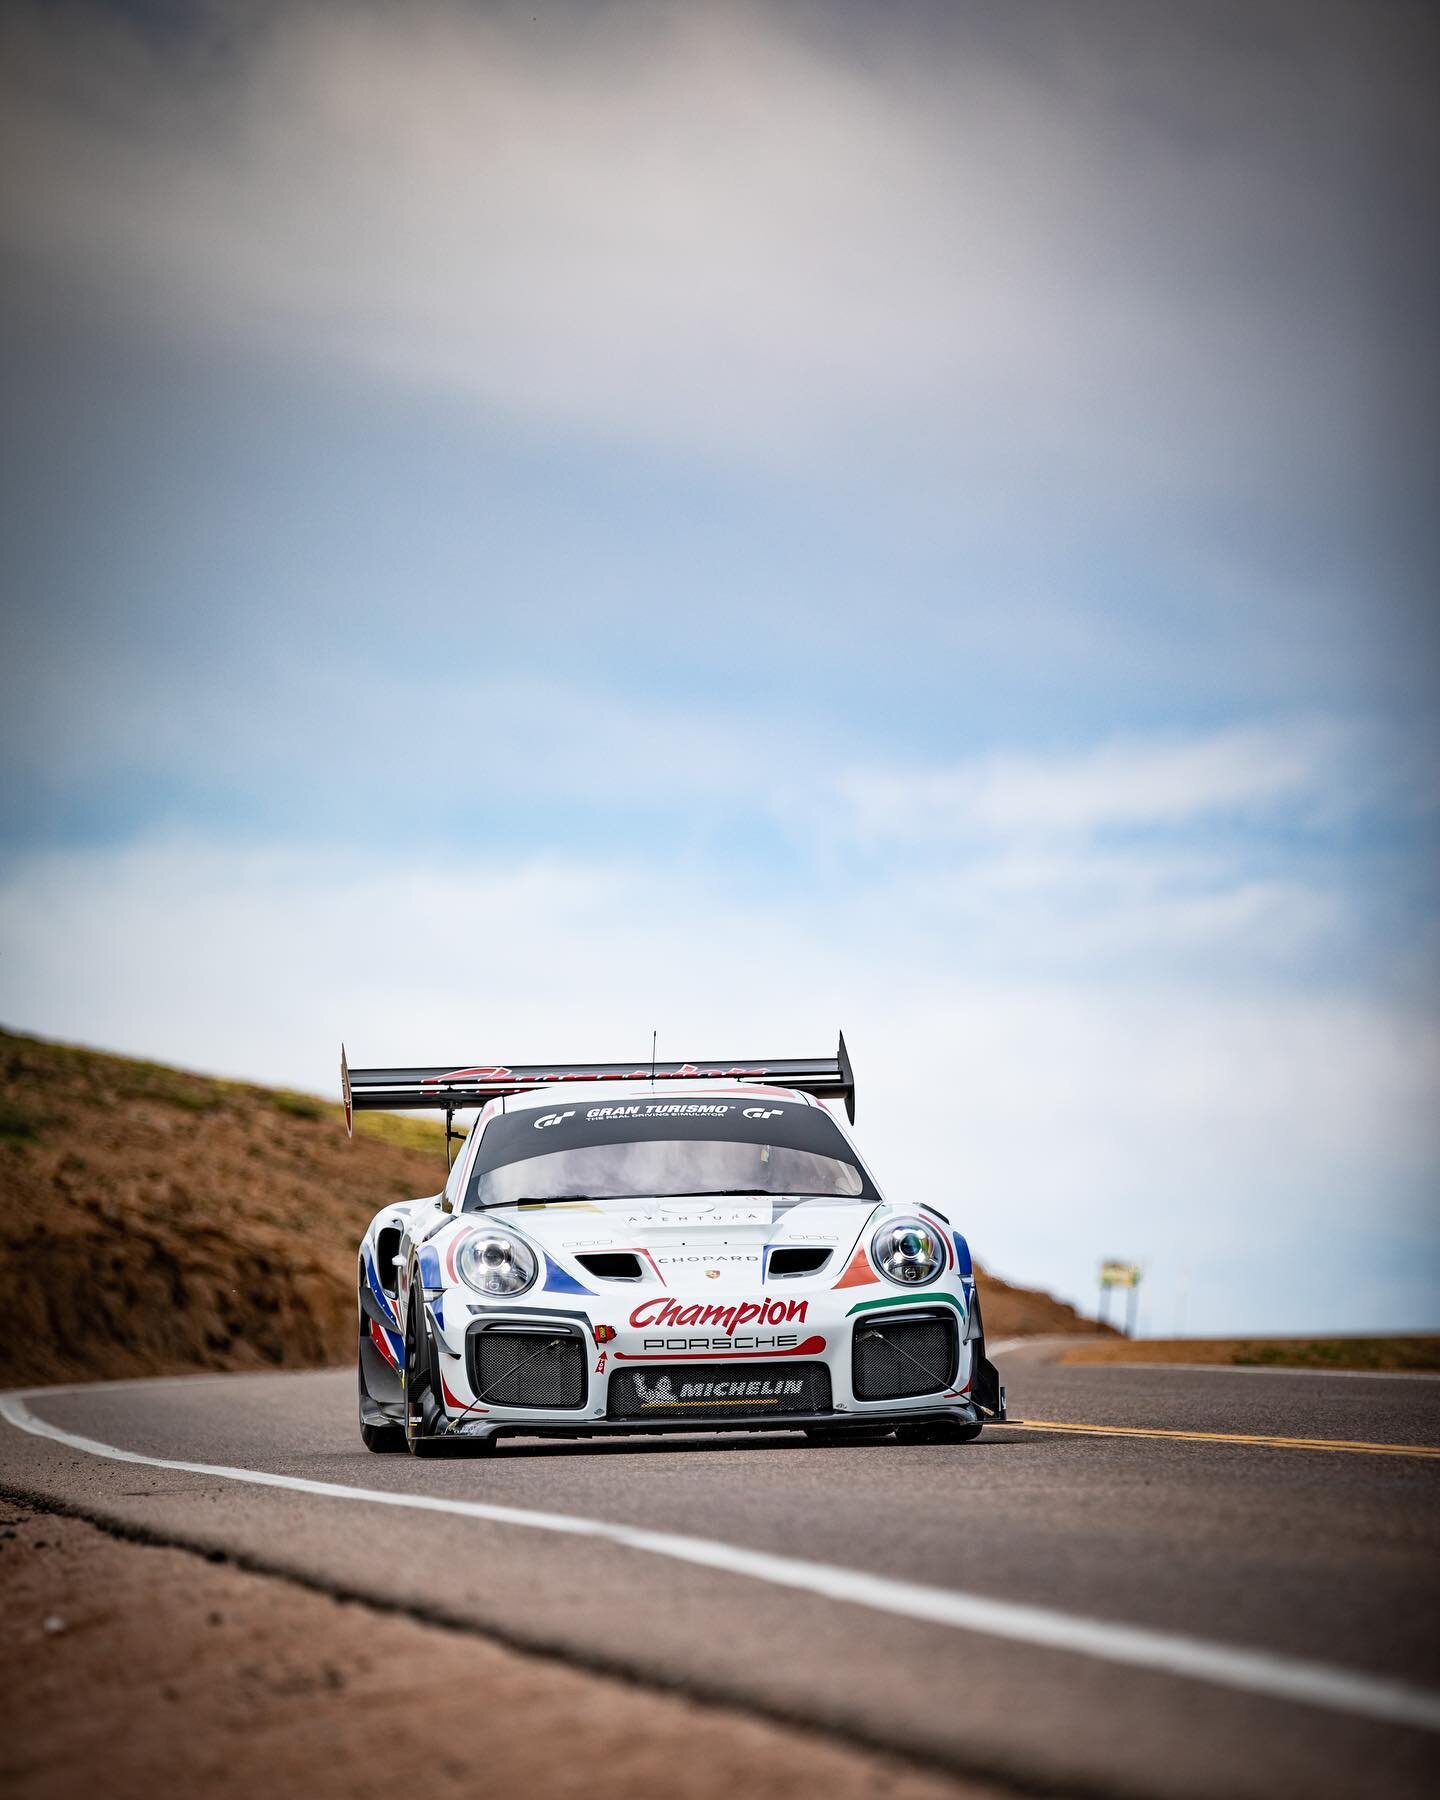 Congrats to @romaindumas_official for your Time Attack 1 victory and 2nd overall finish this year! Once again @porsche proves to be the top competition on Pikes Peak. Shot by @pkrizz for @blaqrocket 

#ppihc #pikespeak #pikespeakhillclimb #ppihc2021 